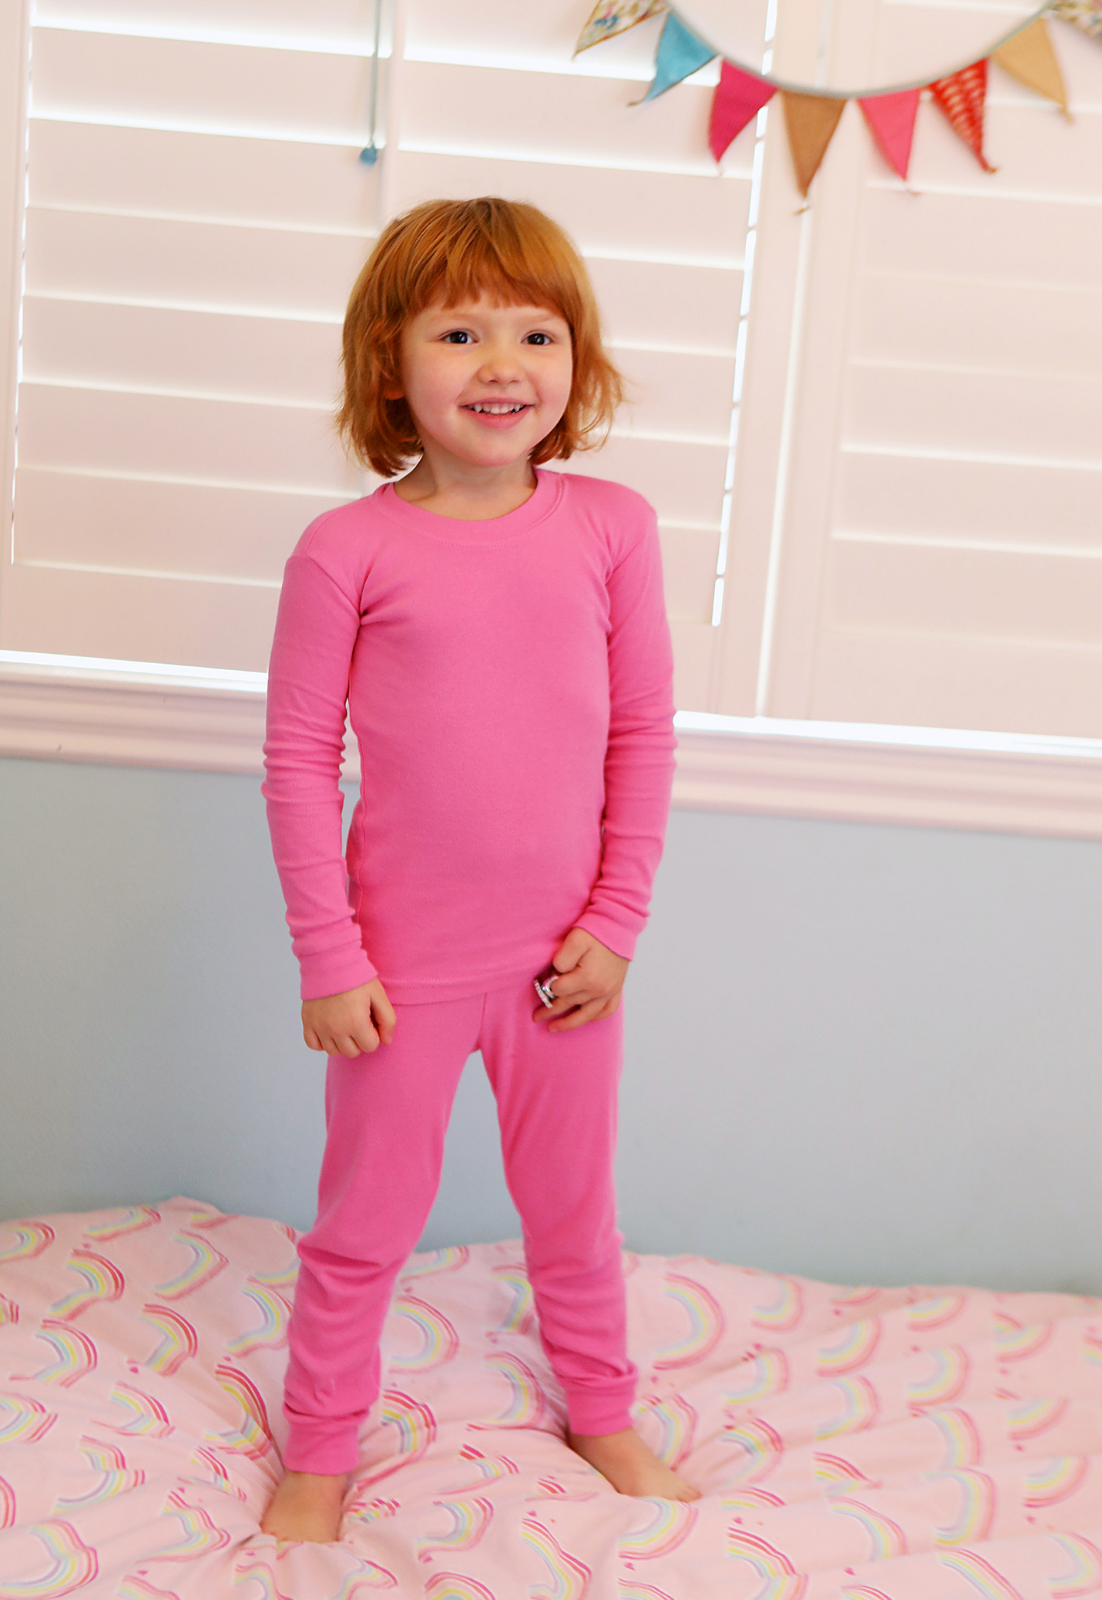 Candy Pink Fleece Pajama Bottoms in CHRISTMAS Pattern